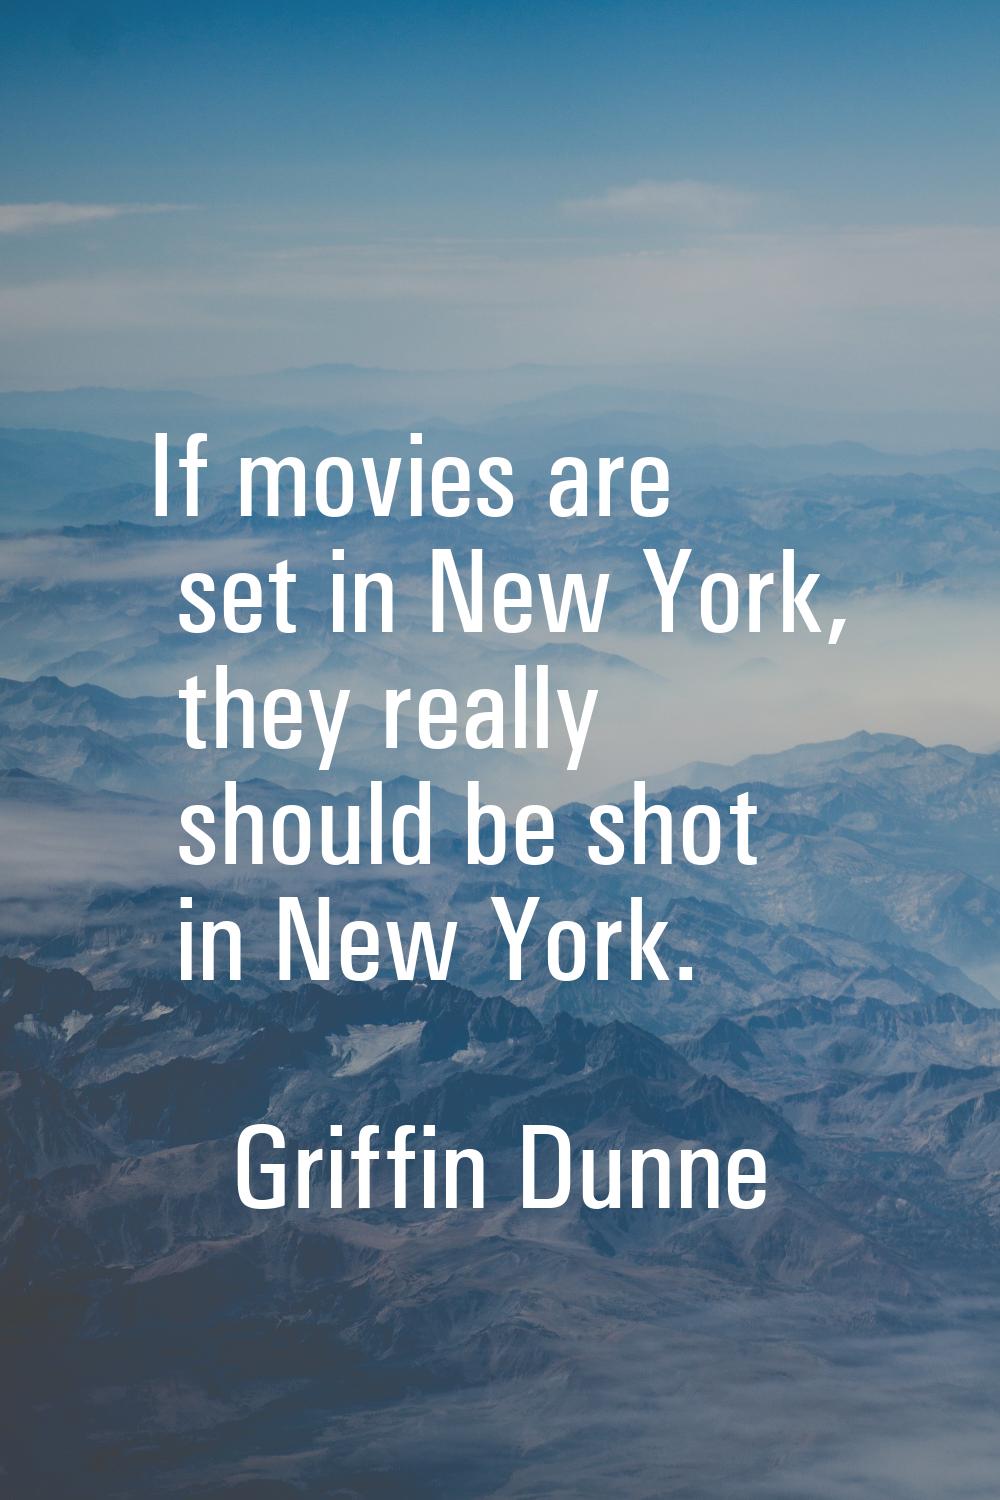 If movies are set in New York, they really should be shot in New York.